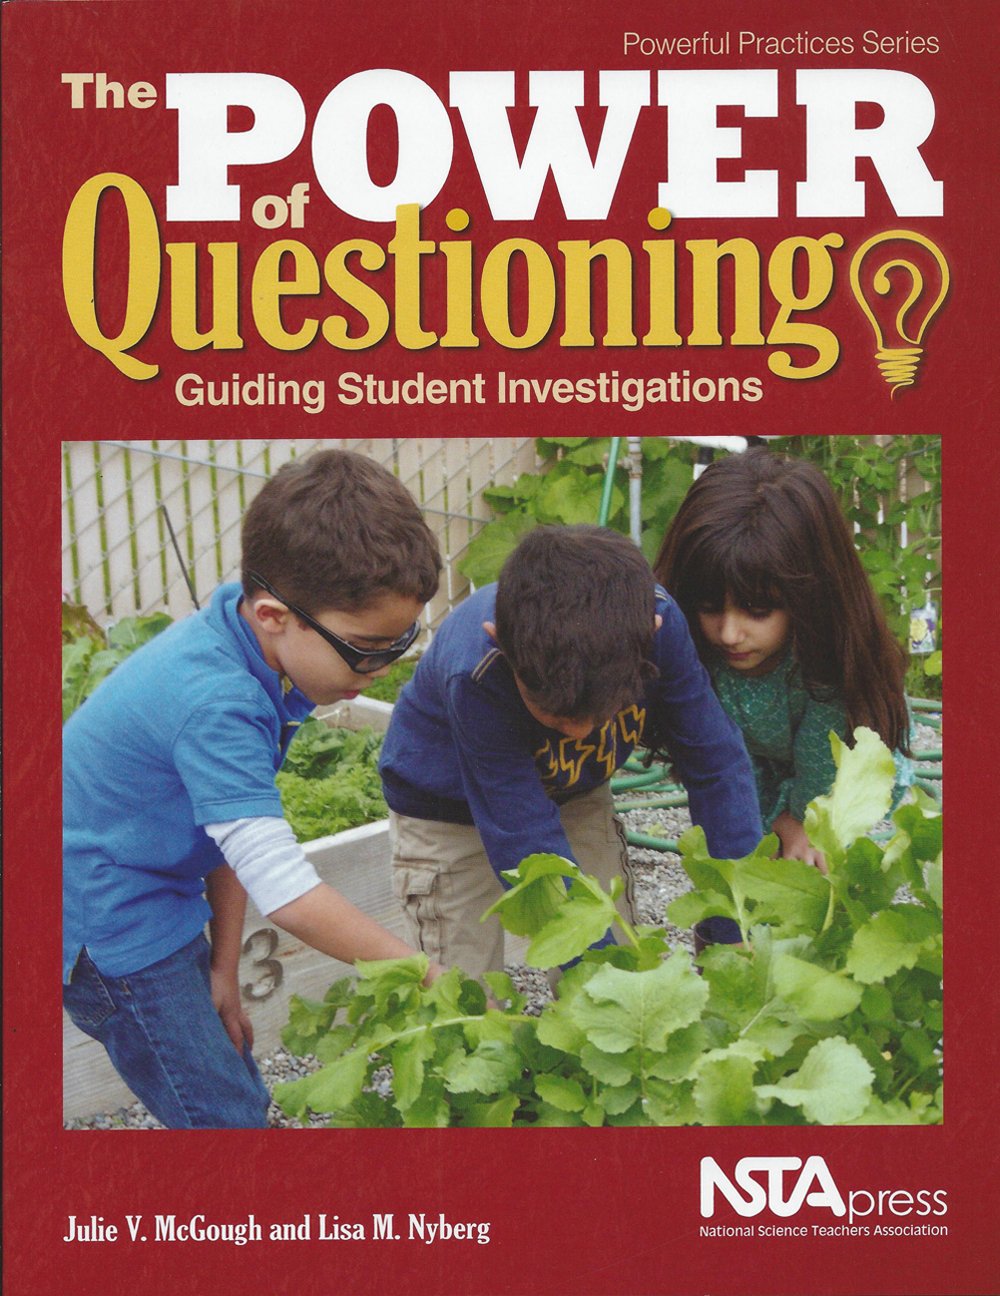 Power of Questioning (The): Guiding Student Investigations